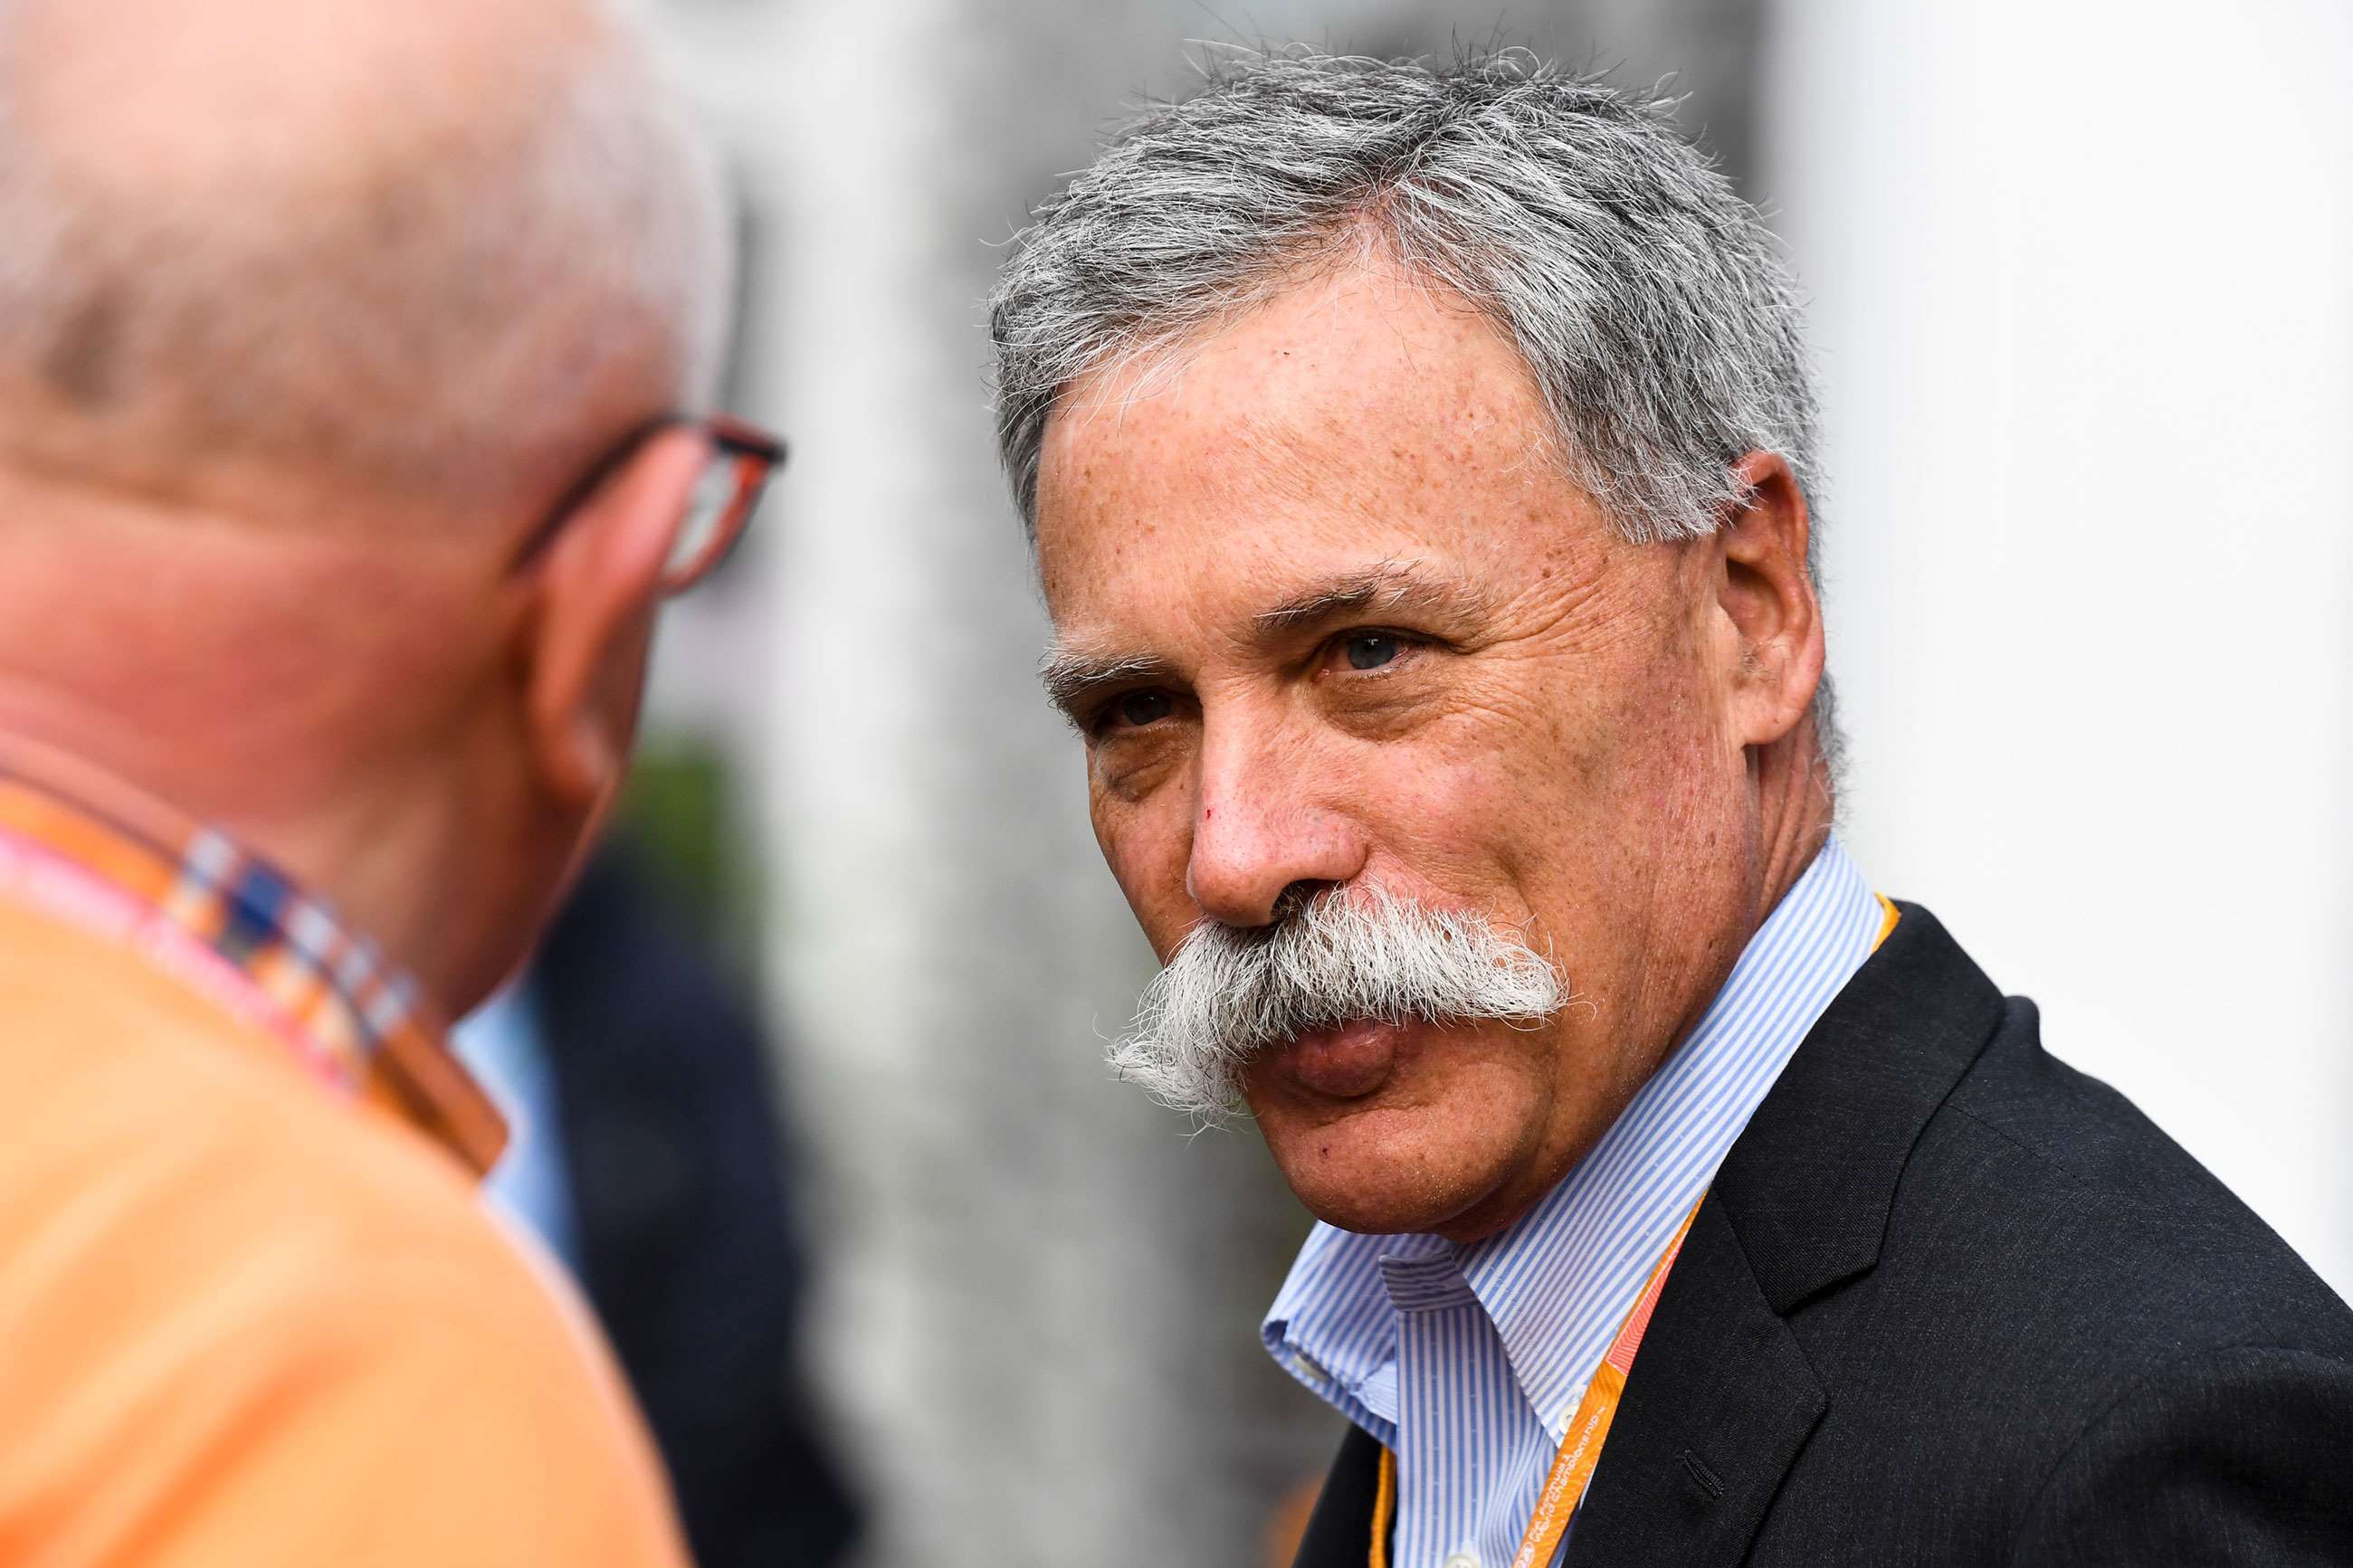 chase-carey-formula-1-ceo-interview-mark-sutton-motorsport-images-mexico-2019-goodwood-05012019.jpg